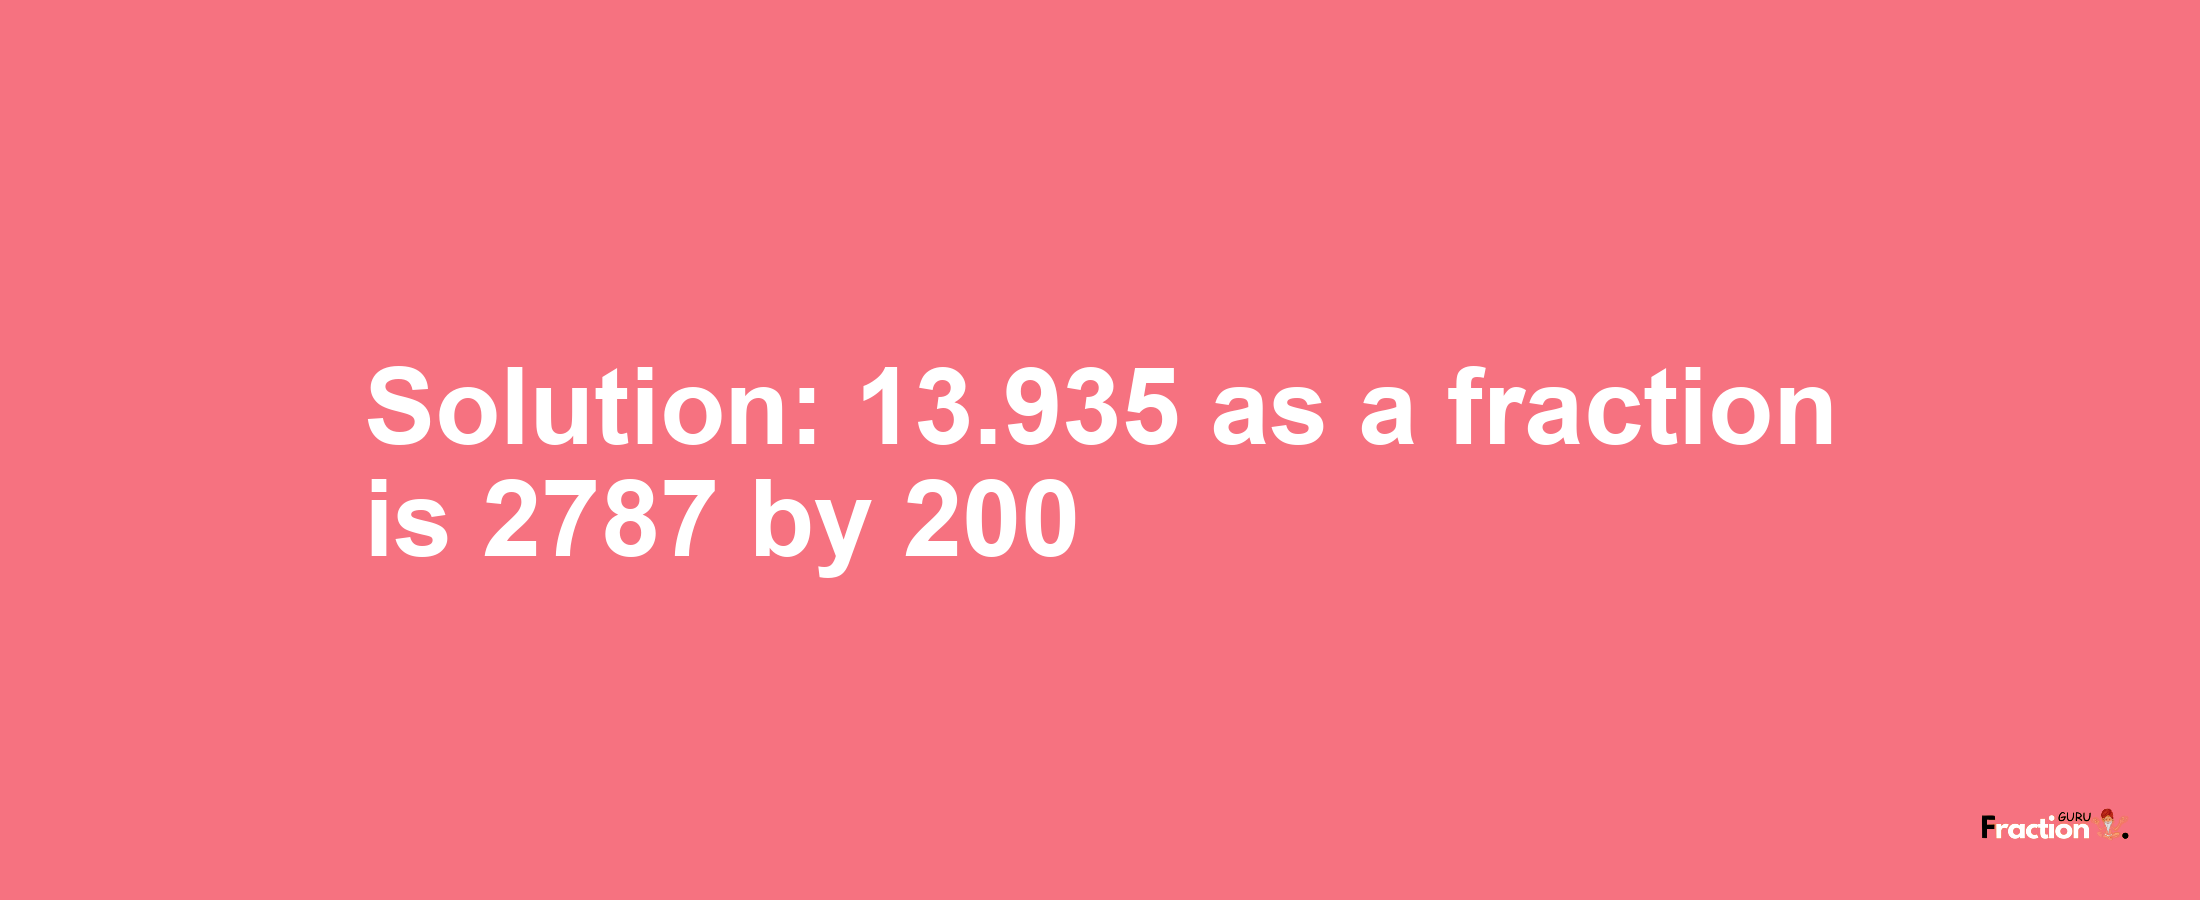 Solution:13.935 as a fraction is 2787/200